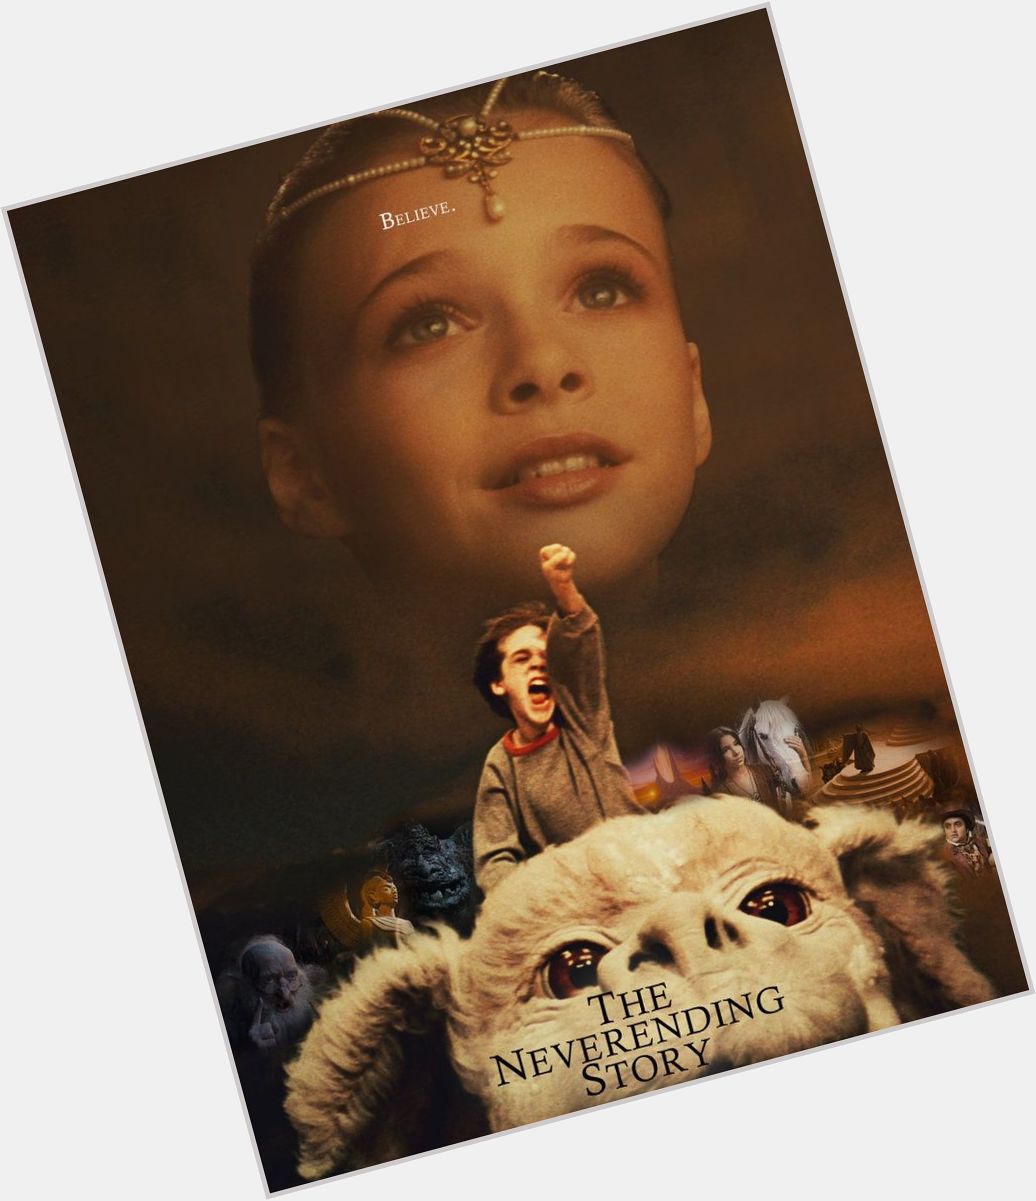 The NeverEnding Story  (1984)
Happy Birthday, Barret Oliver! 